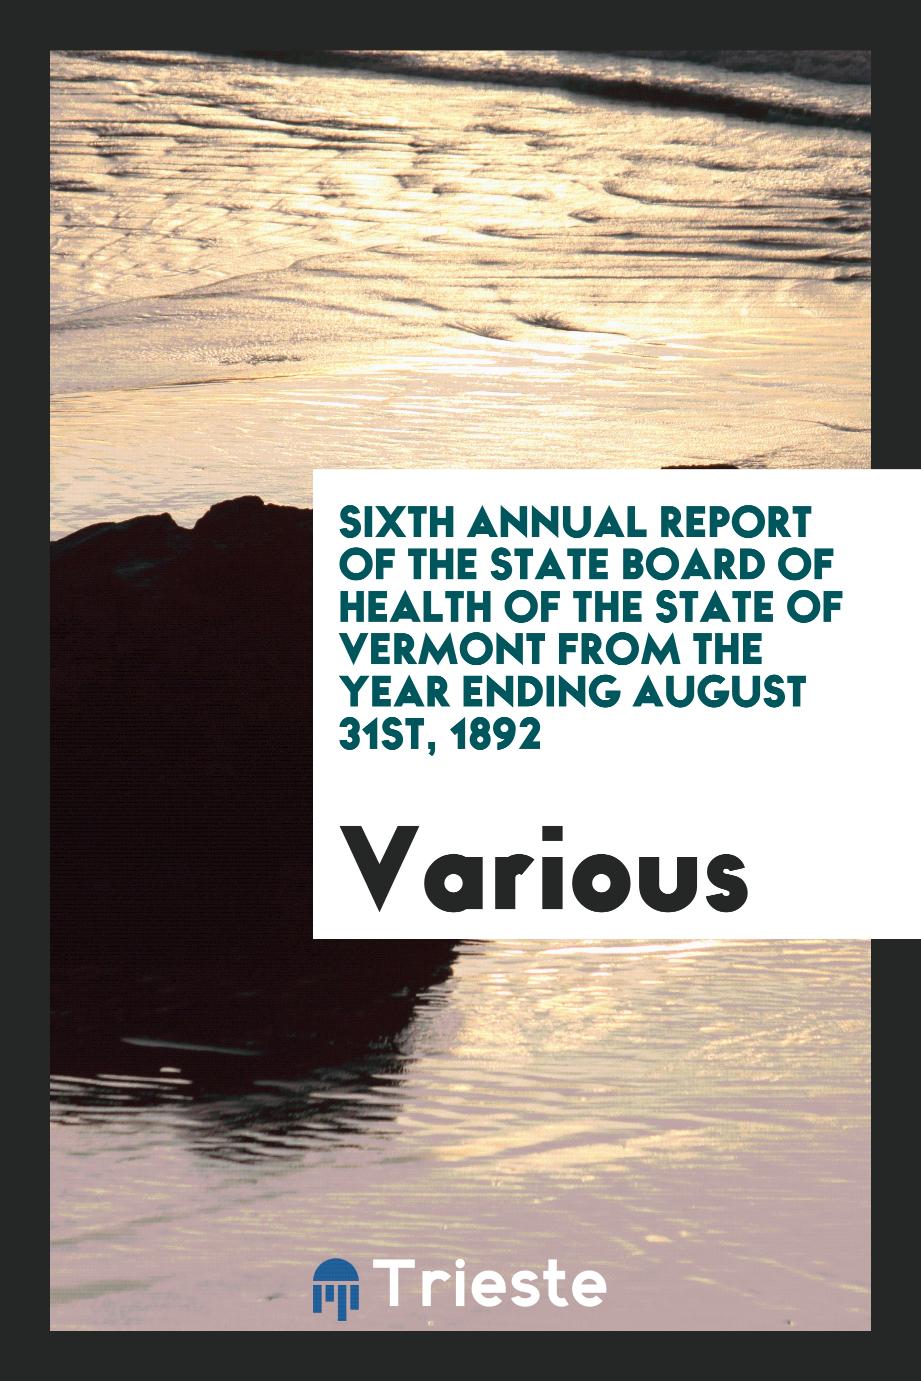 Sixth Annual Report of the State Board of Health of the State of Vermont from the Year Ending August 31st, 1892